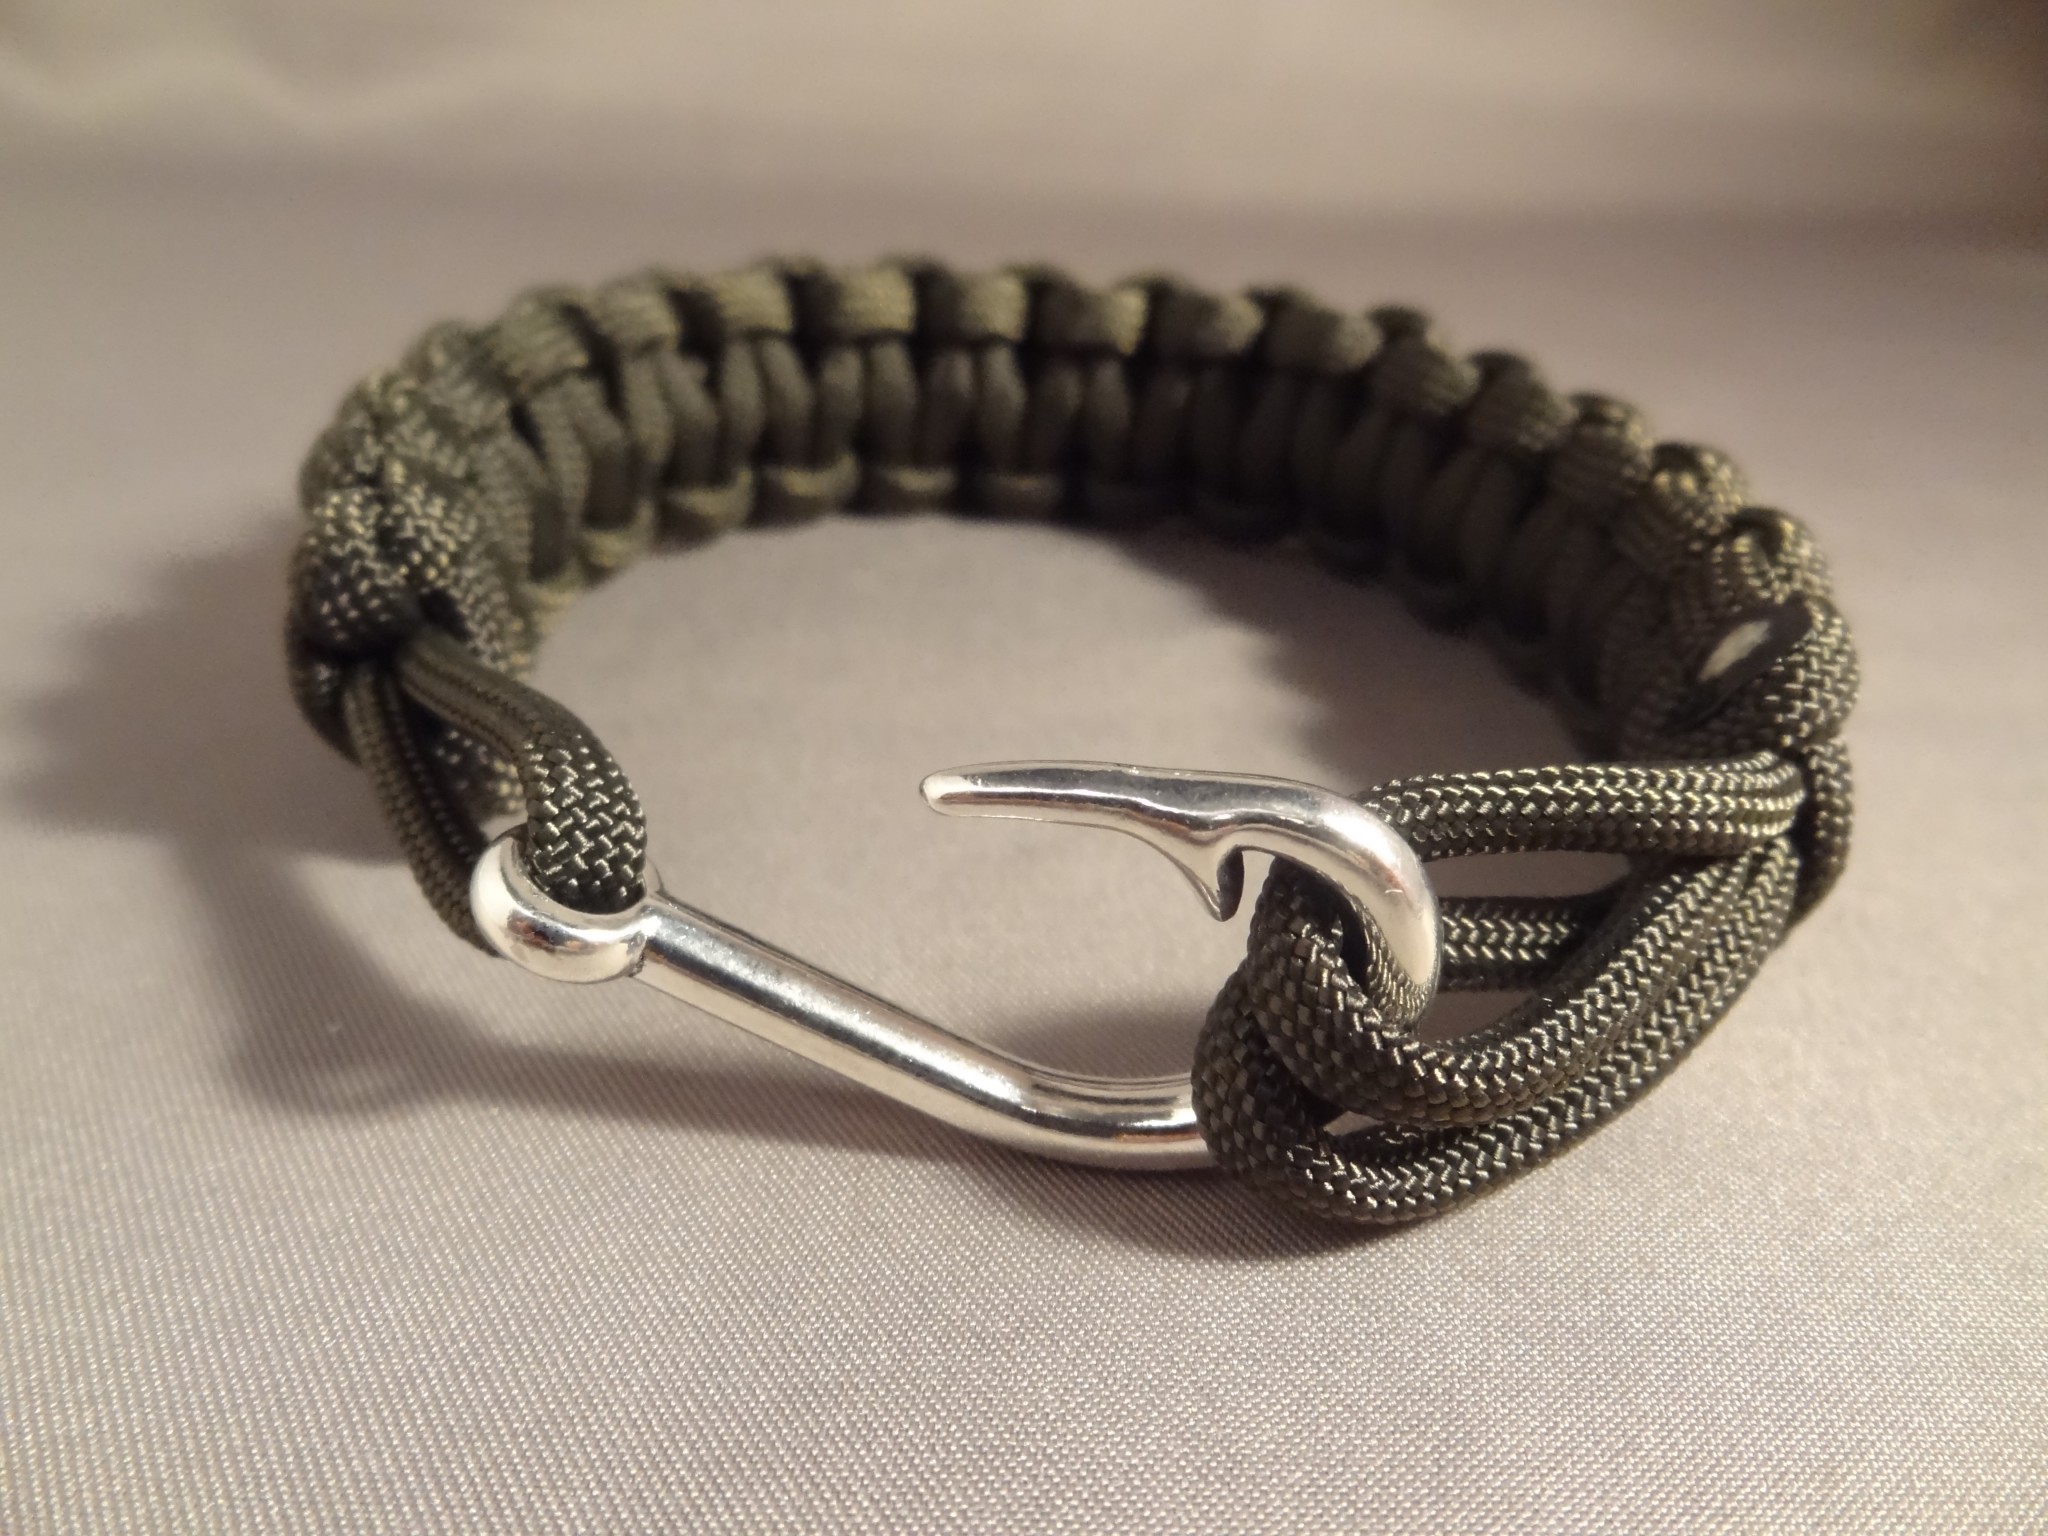 From LeStage's Eventide Collection, Fish Hook Bracelet - Ocean Offerings